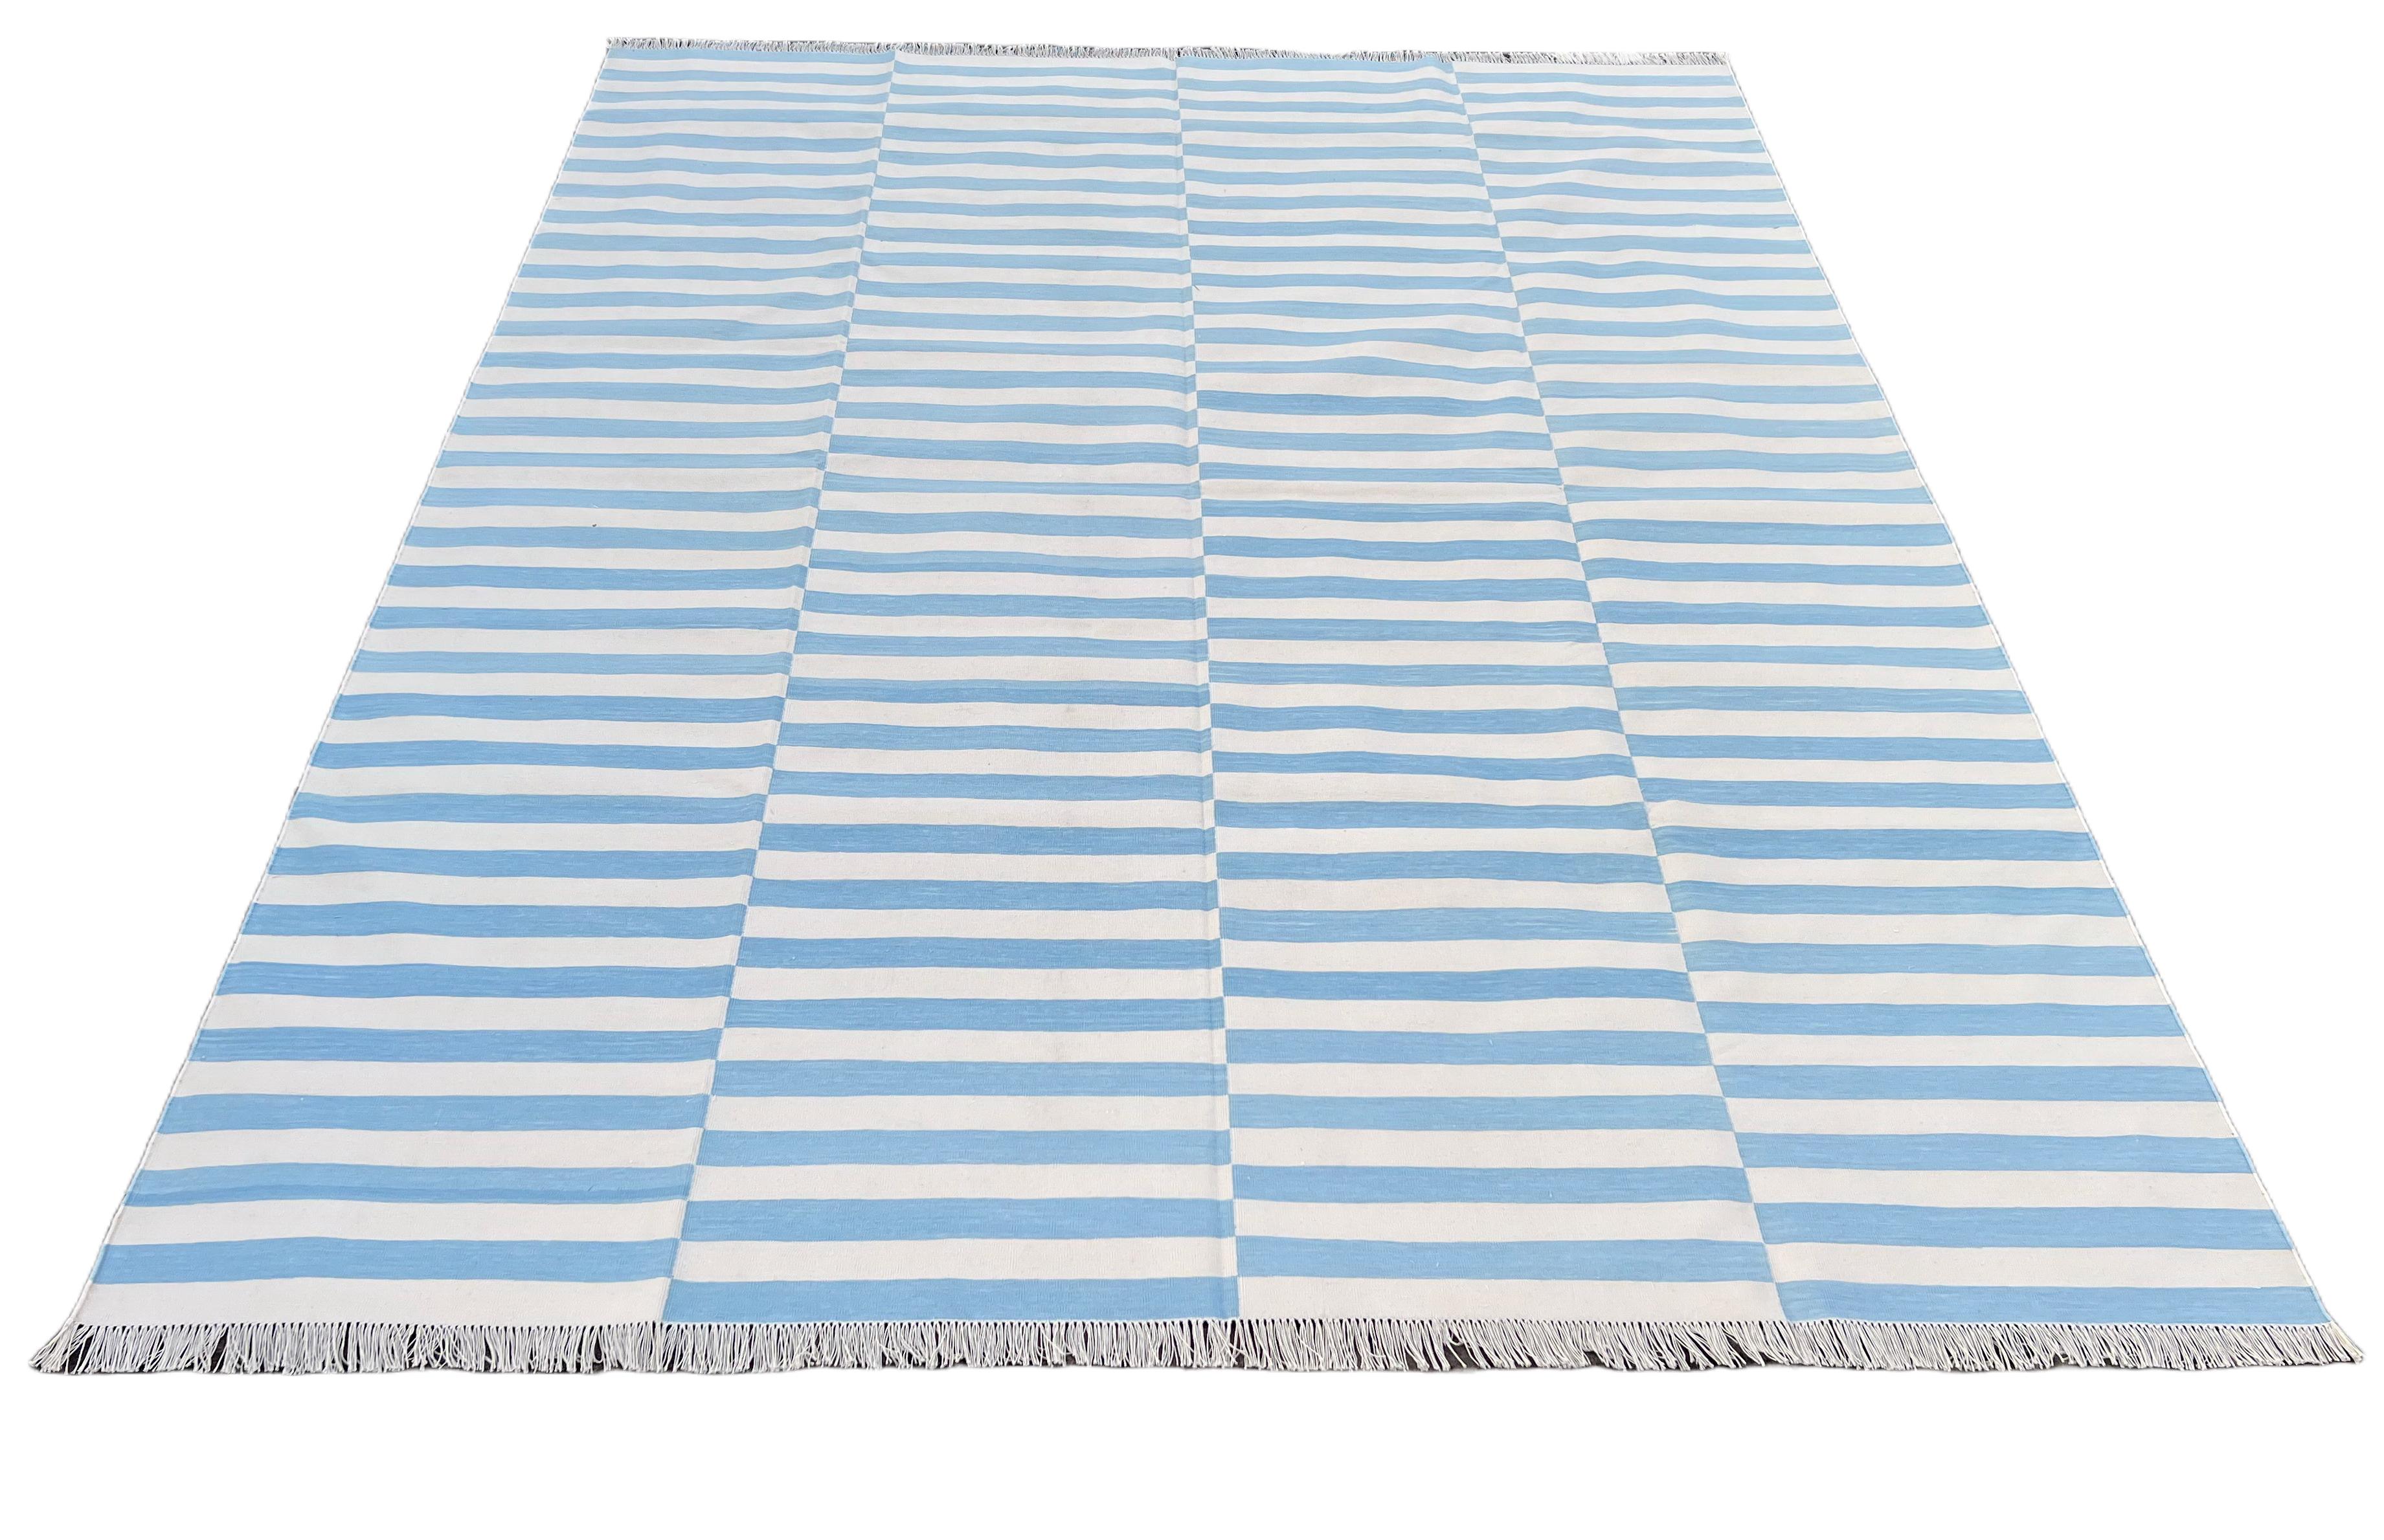 Hand-Woven Handmade Cotton Area Flat Weave Rug, Sky Blue & White Striped Indian Dhurrie Rug For Sale